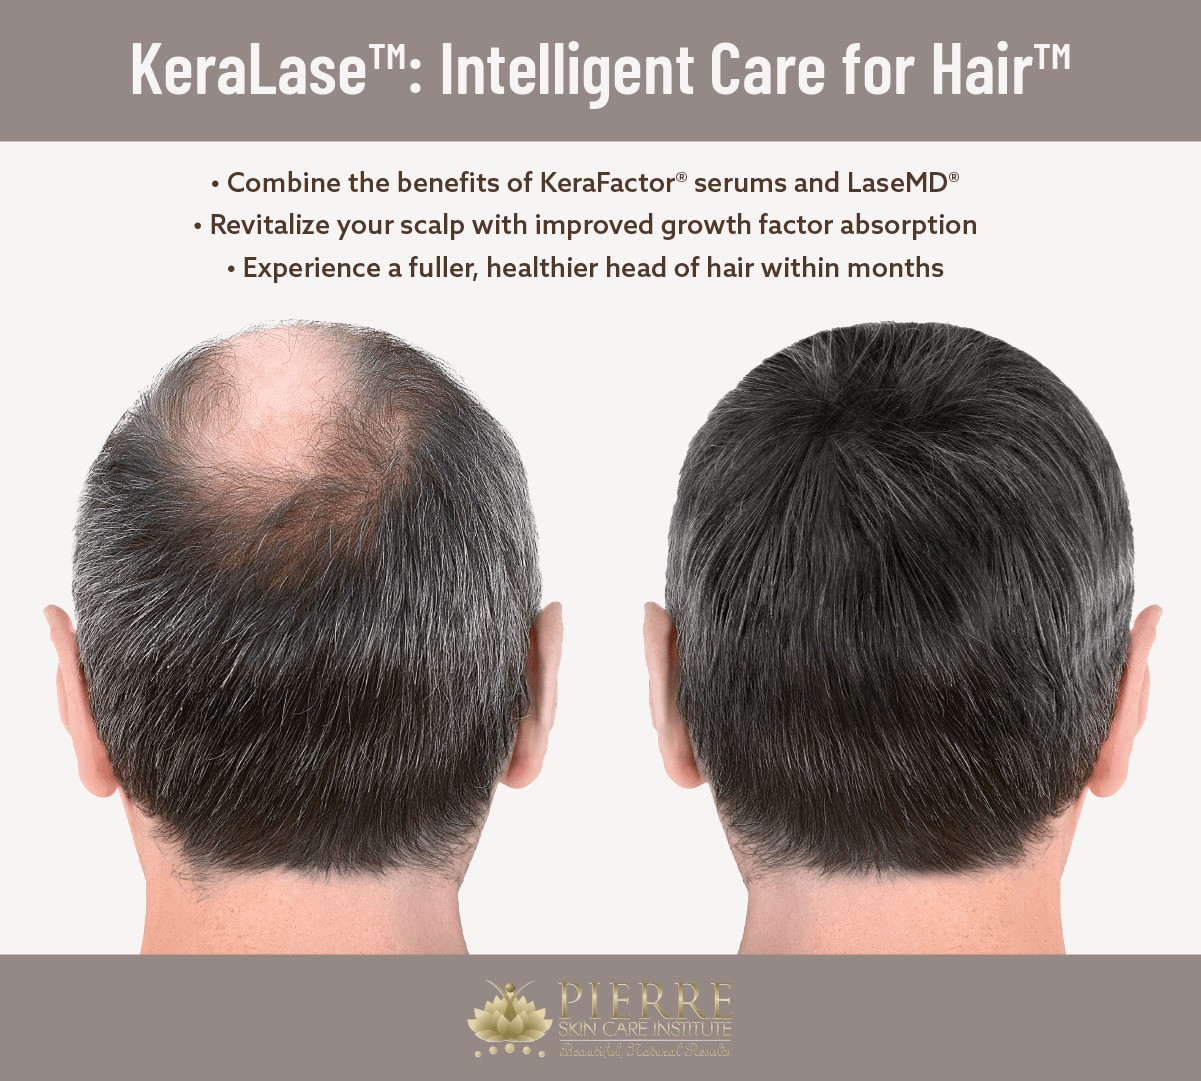 See what makes KeraLase™ at Thousand Oaks’ Pierre Skin Care Institute “intelligent care.”